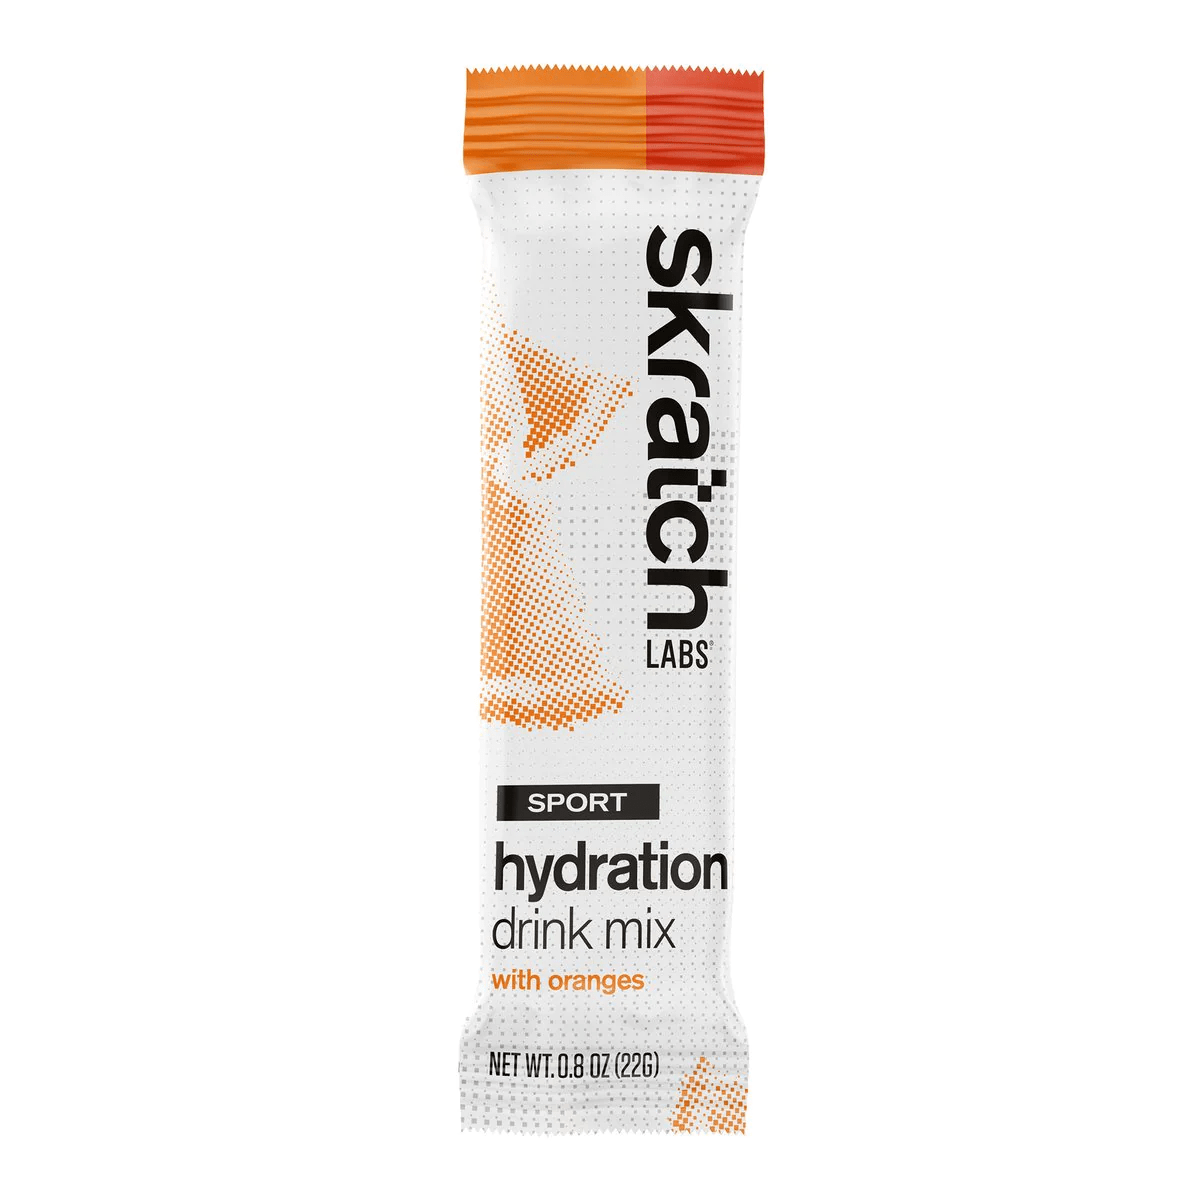 Skratch Labs Sport Hydration Drink Mix Single 22g Oranges Other - Nutrition - Drink Mixes